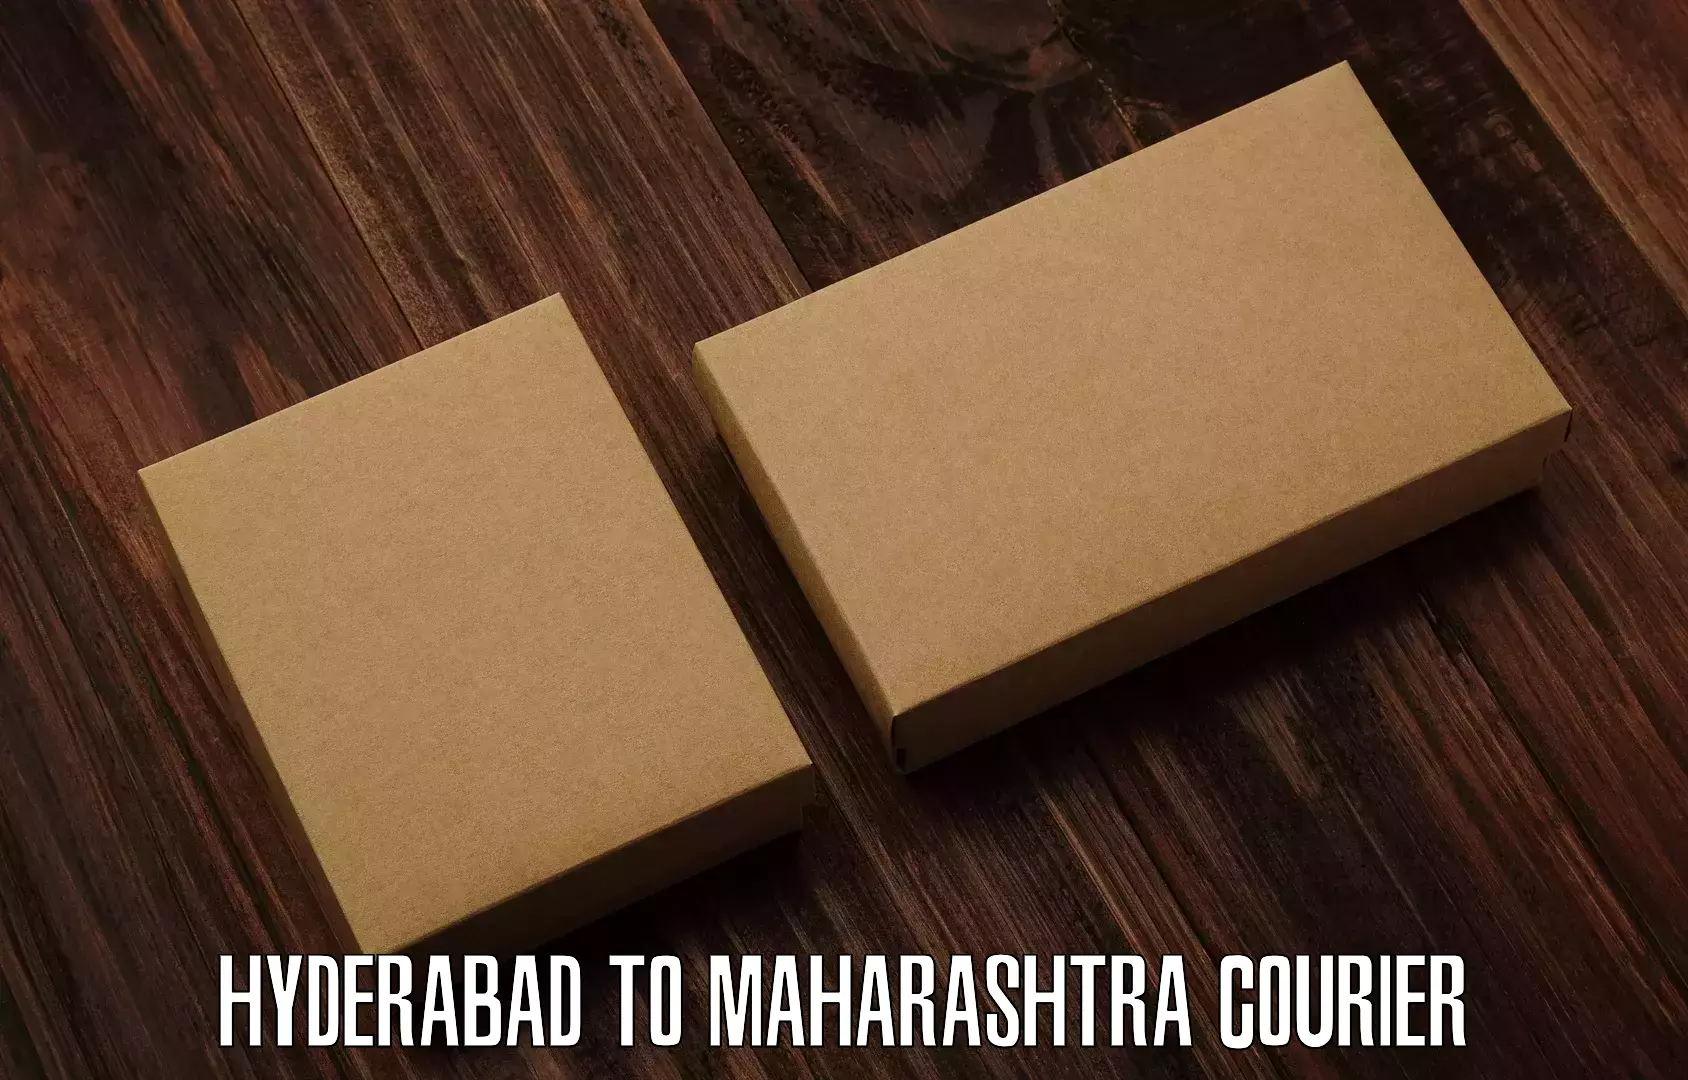 Professional courier handling Hyderabad to Shevgaon